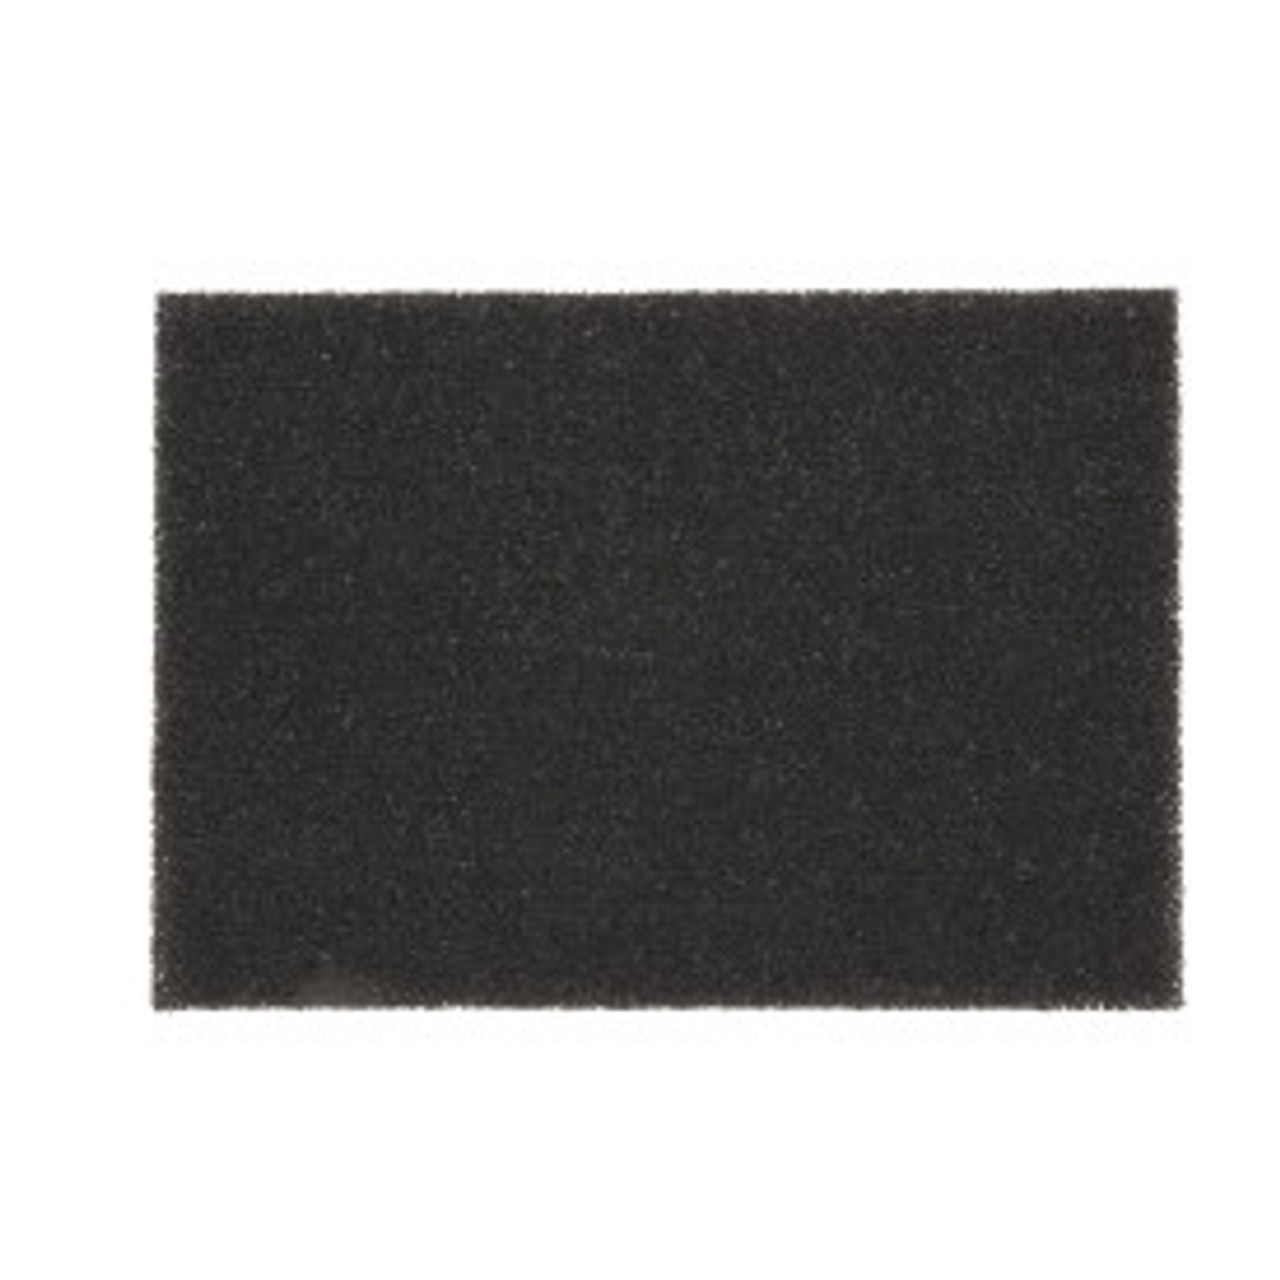 3M spp14x28 Scotchbrite surface preparation rectangle floor pads 14x28 x.5 in... 